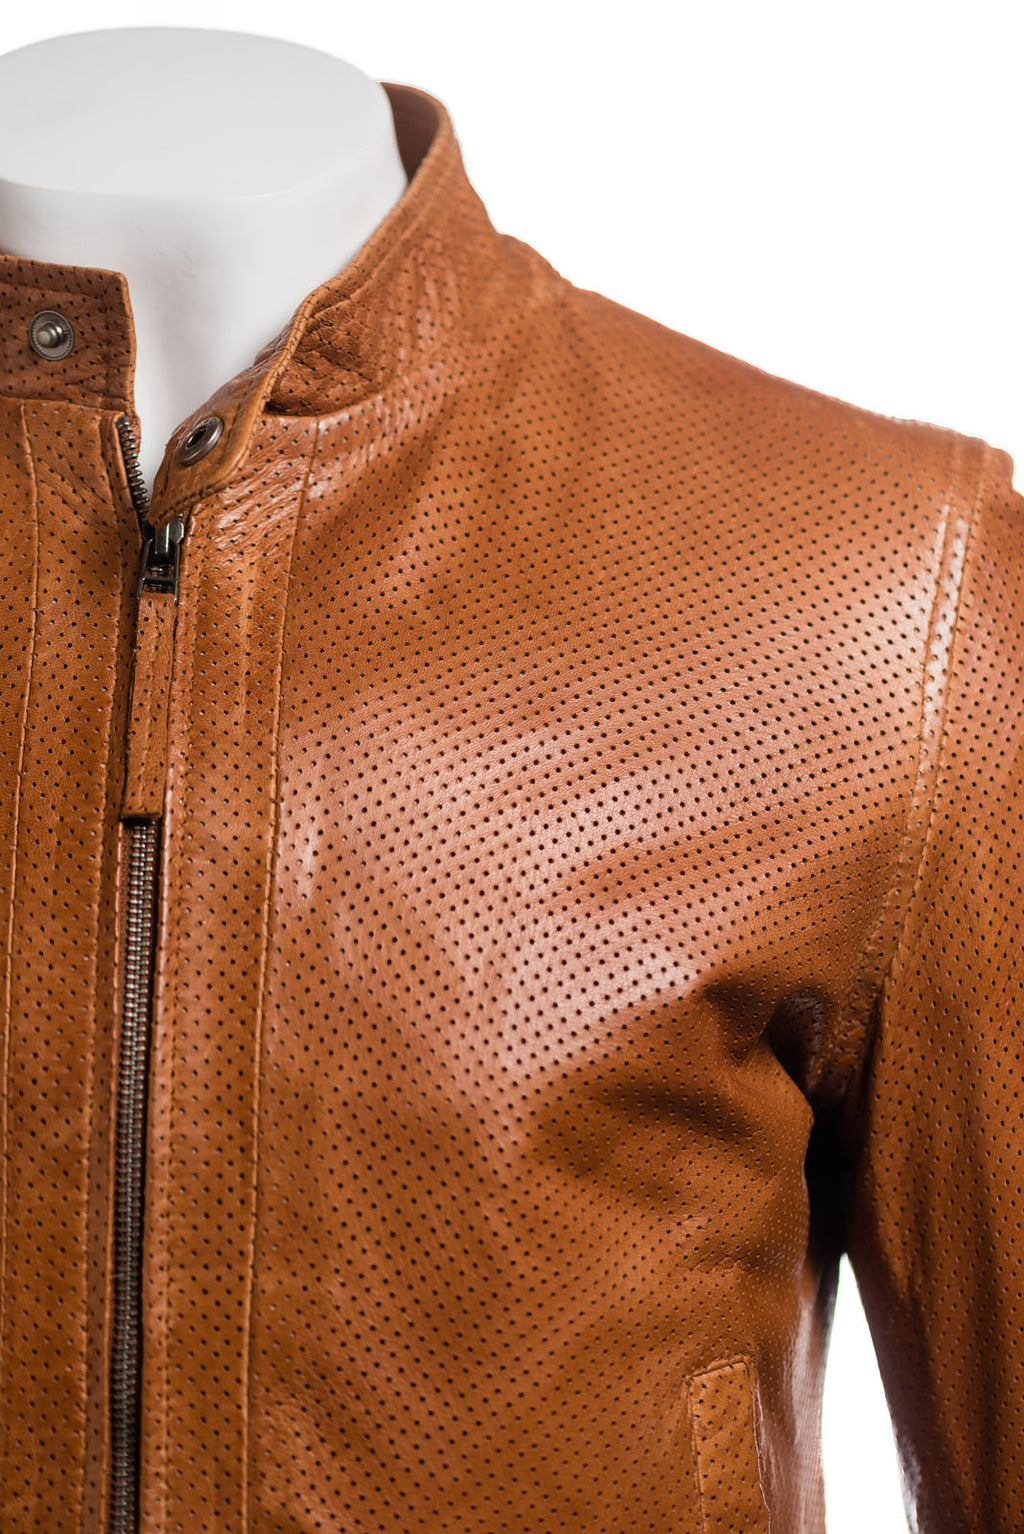 Men's Micro-Perforated Short Zipped Leather Jacket: Sabino